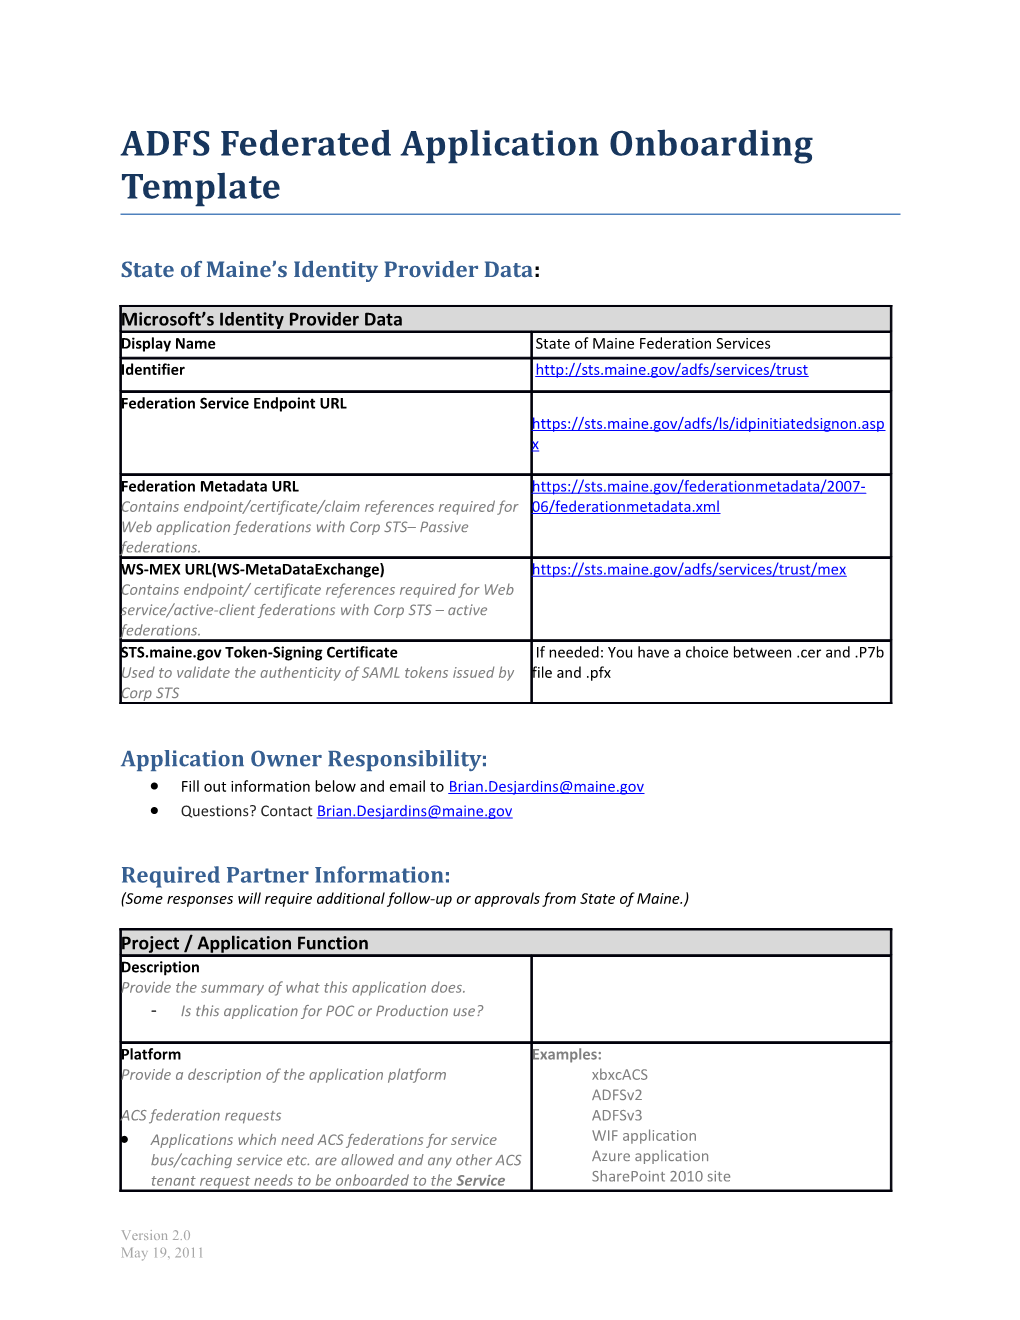 ADFS Federated Application Onboarding Template